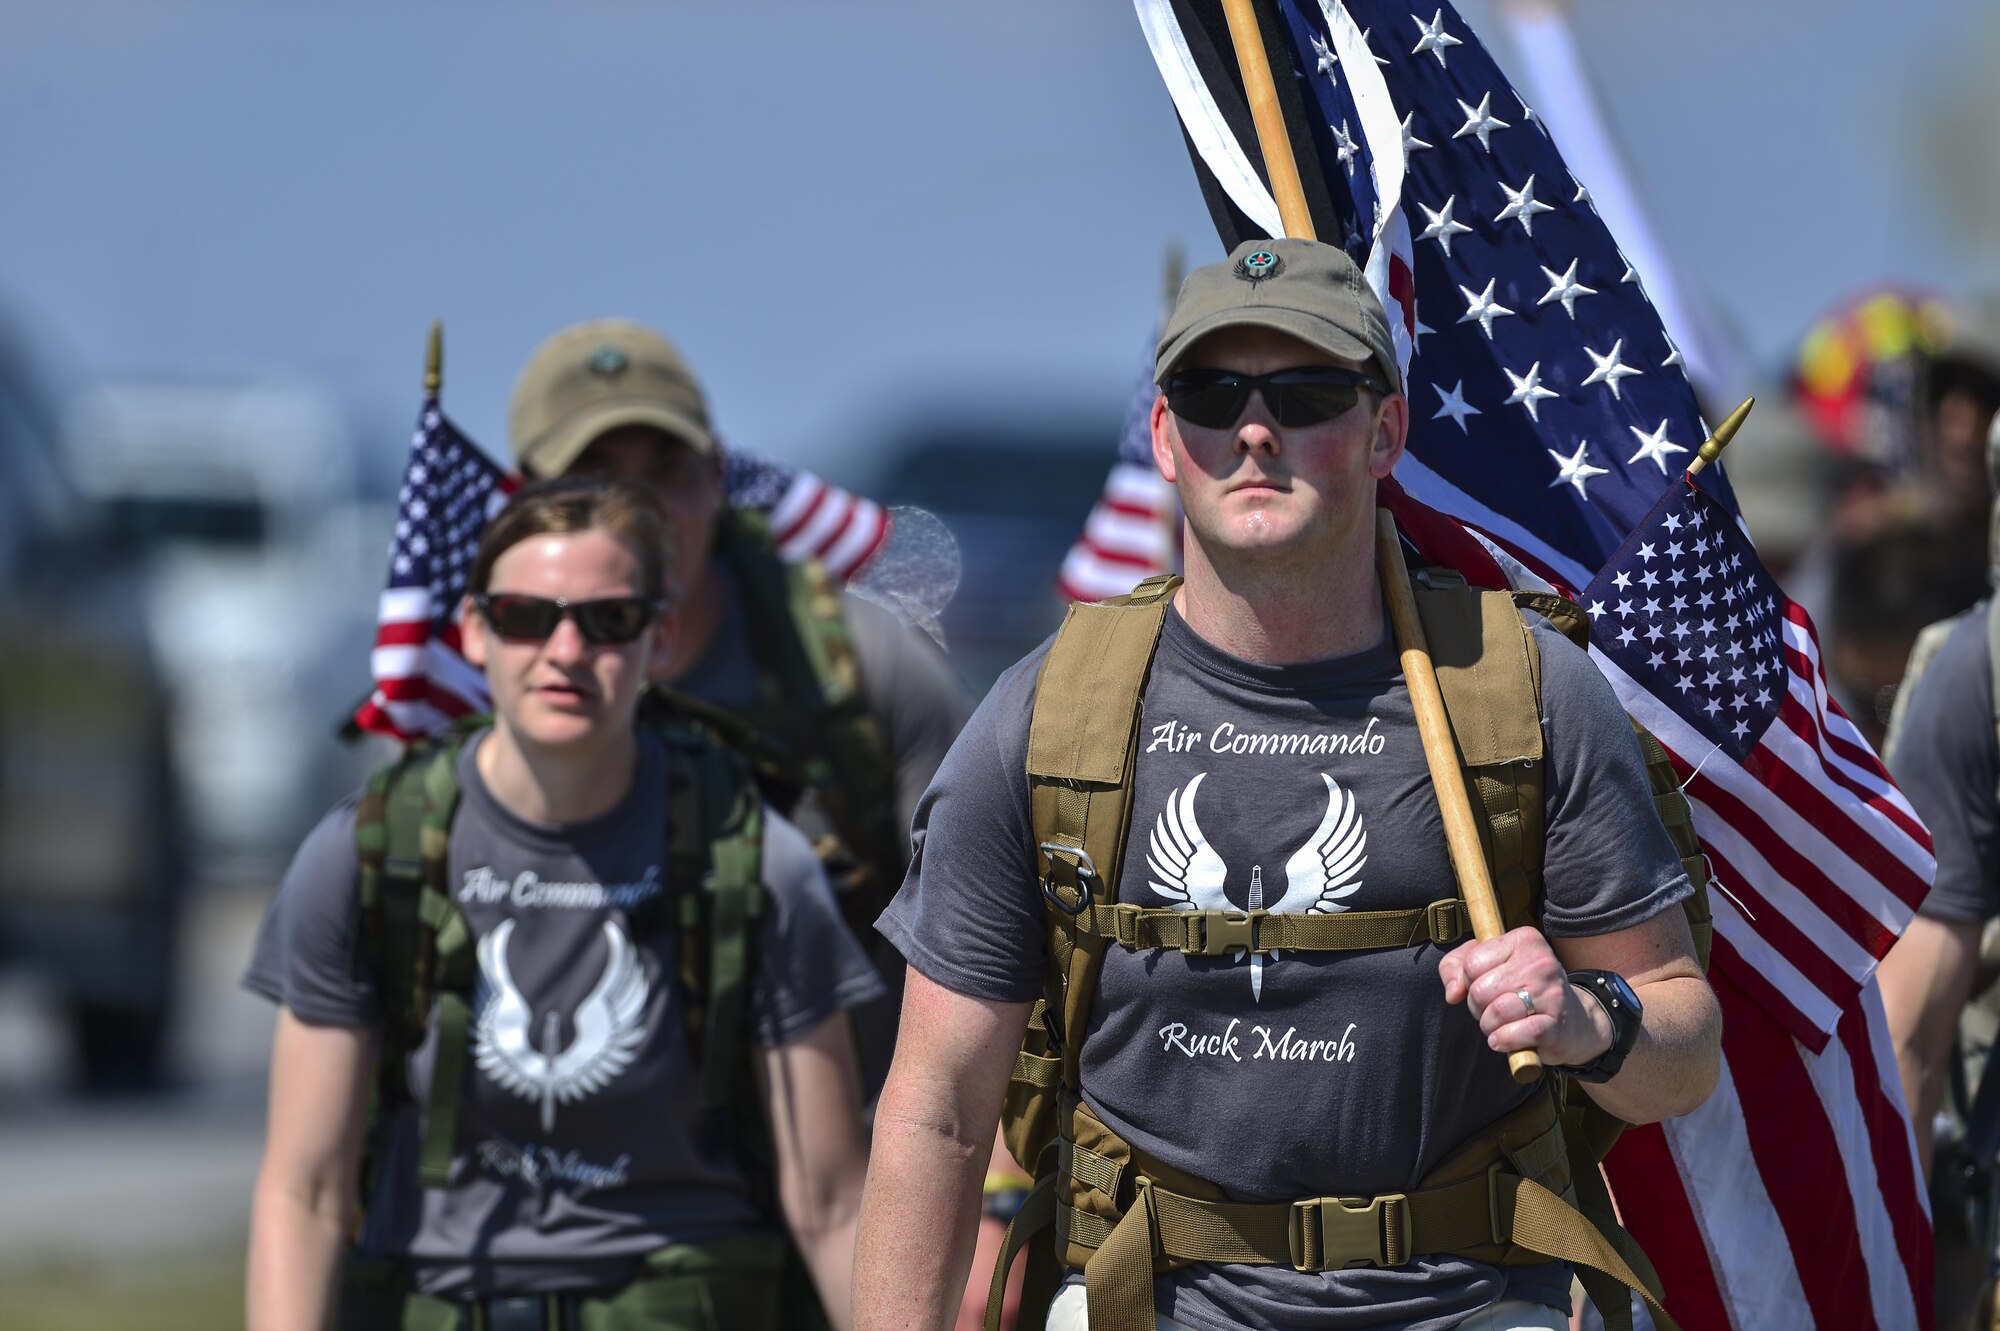 Tech Sgt. Joe Scobey, 18th Flight Test Squadron special missions aviator, leads Air Commando Ruckers to the finish line at Hurlburt Field, Fla., March 20, 2014. The Air Commando Ruckers completed a 450-mile ruck march from MacDill Air Force Base, Fla. carrying flags with the names of the seven fallen Marine Special Operations Command members and four Army National Guard members who lost their lives during a training mission on Eglin Range, Fla.(U.S. Air Force photo/Airman 1st Class Jeff Parkinson)